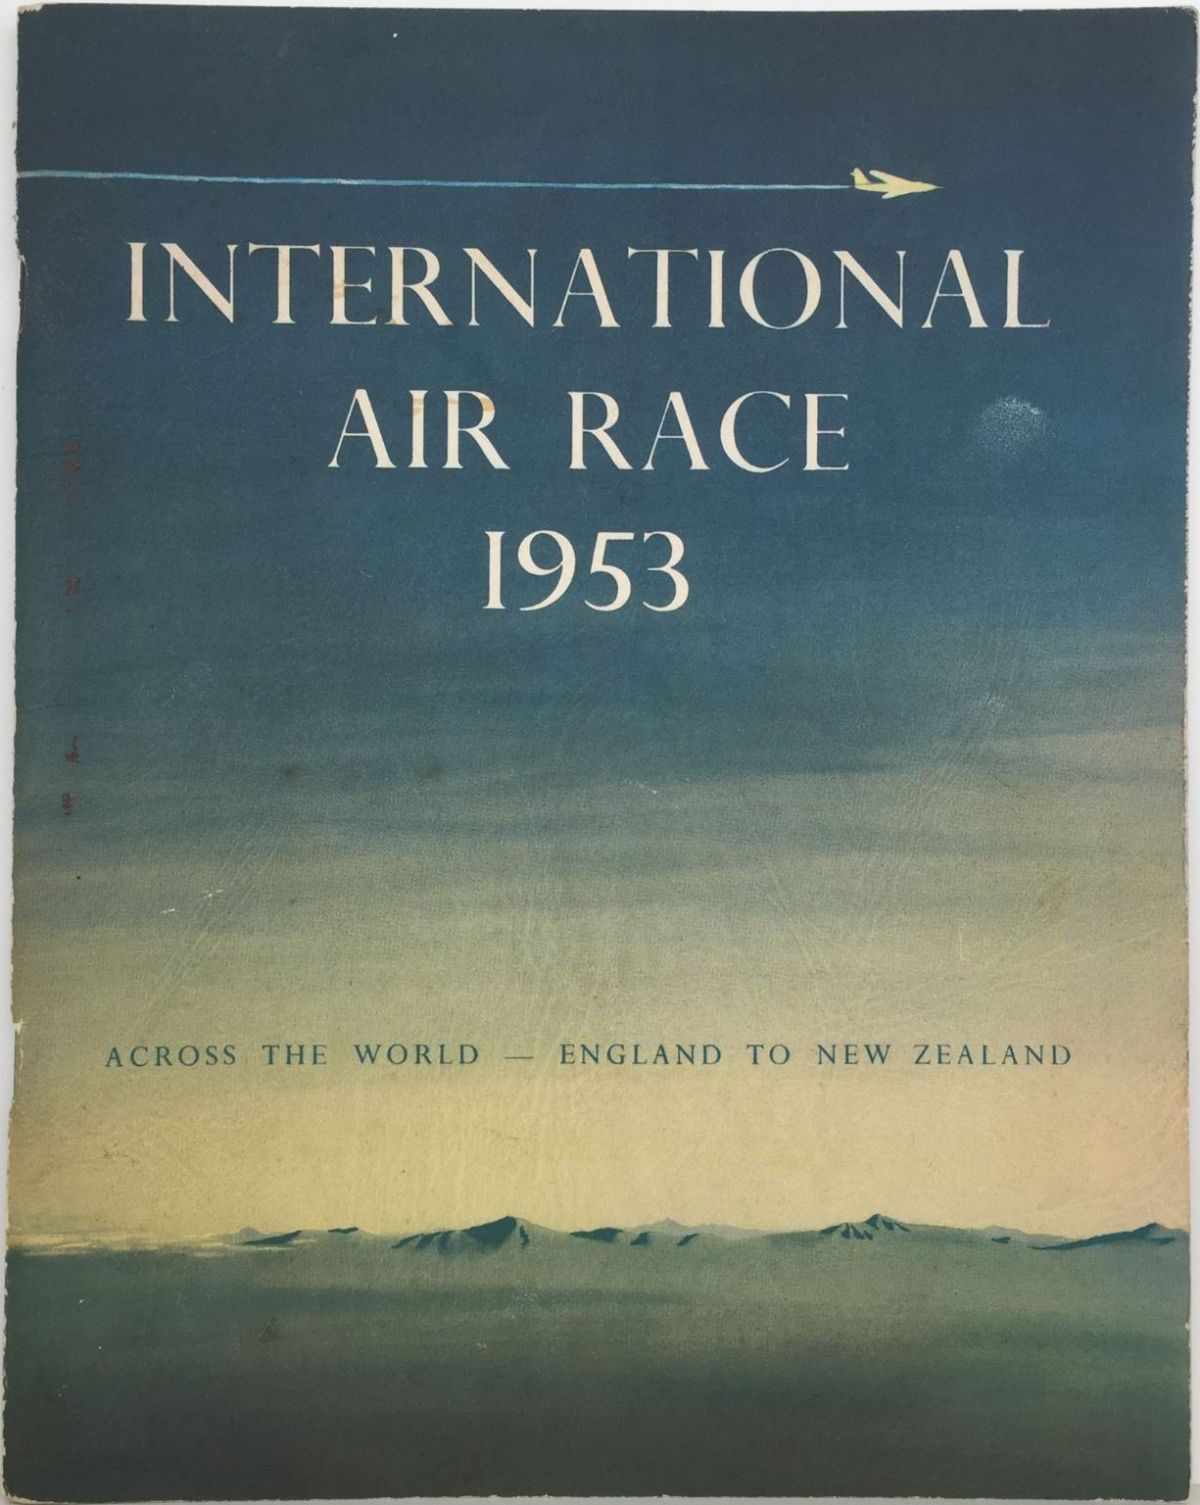 THE INTERNATIONAL AIR RACE 1953: England To New Zealand - Official Programme